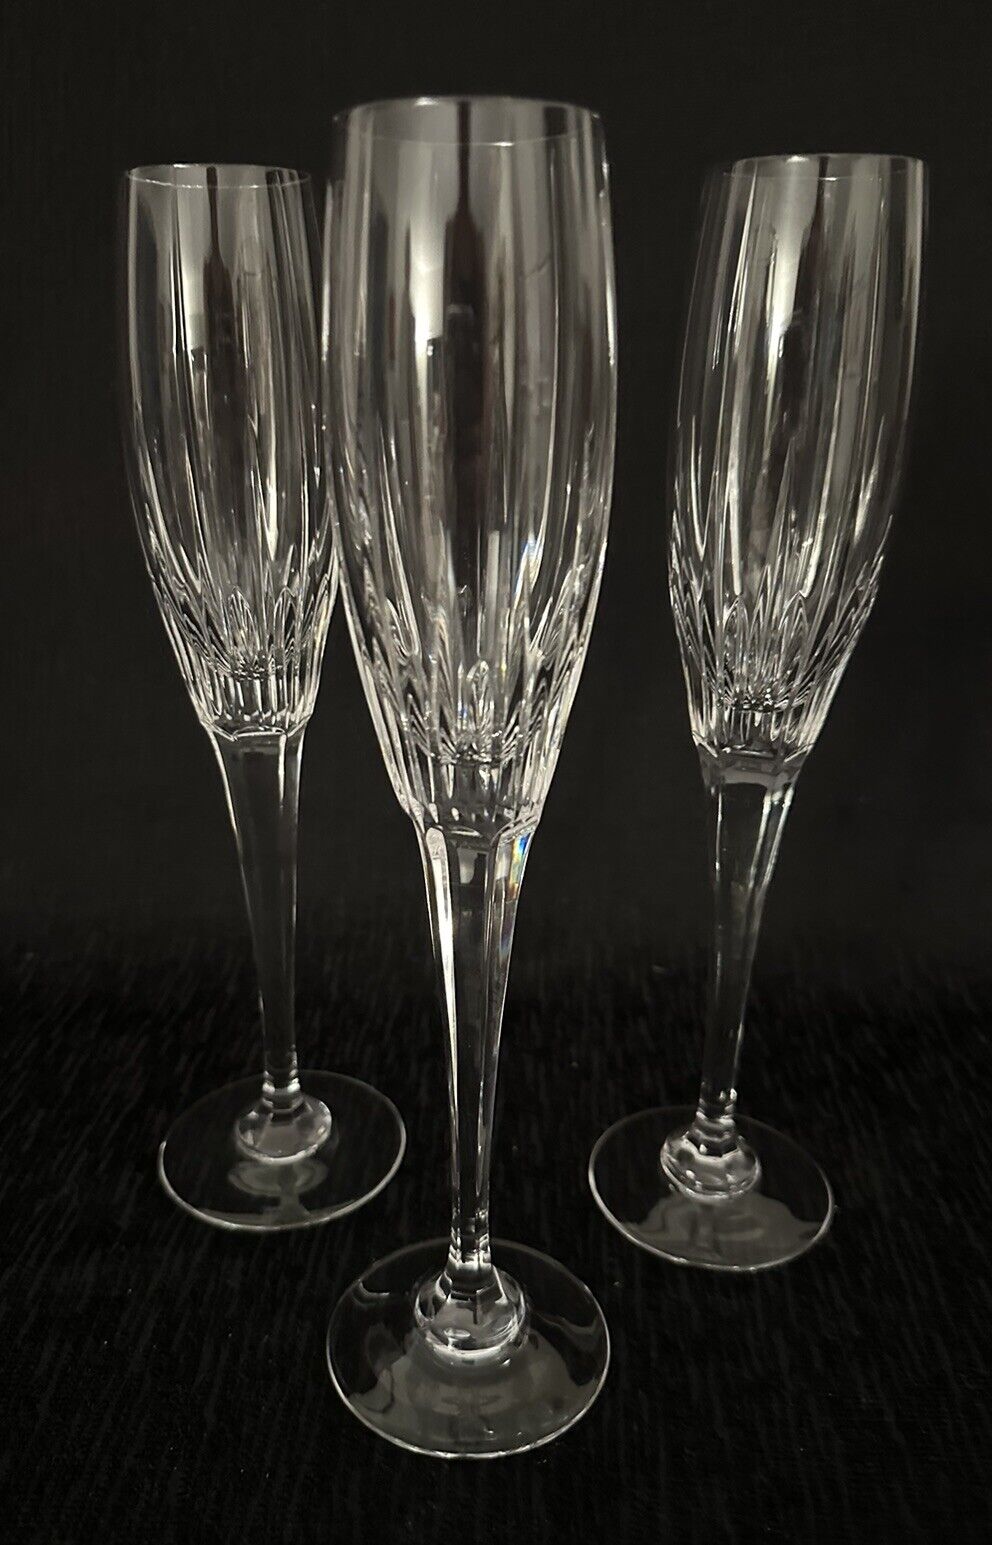 VNTG Mikasa Artic Lights Crystal Champagne Flutes 103/4 Inches Blown Glass Set/3